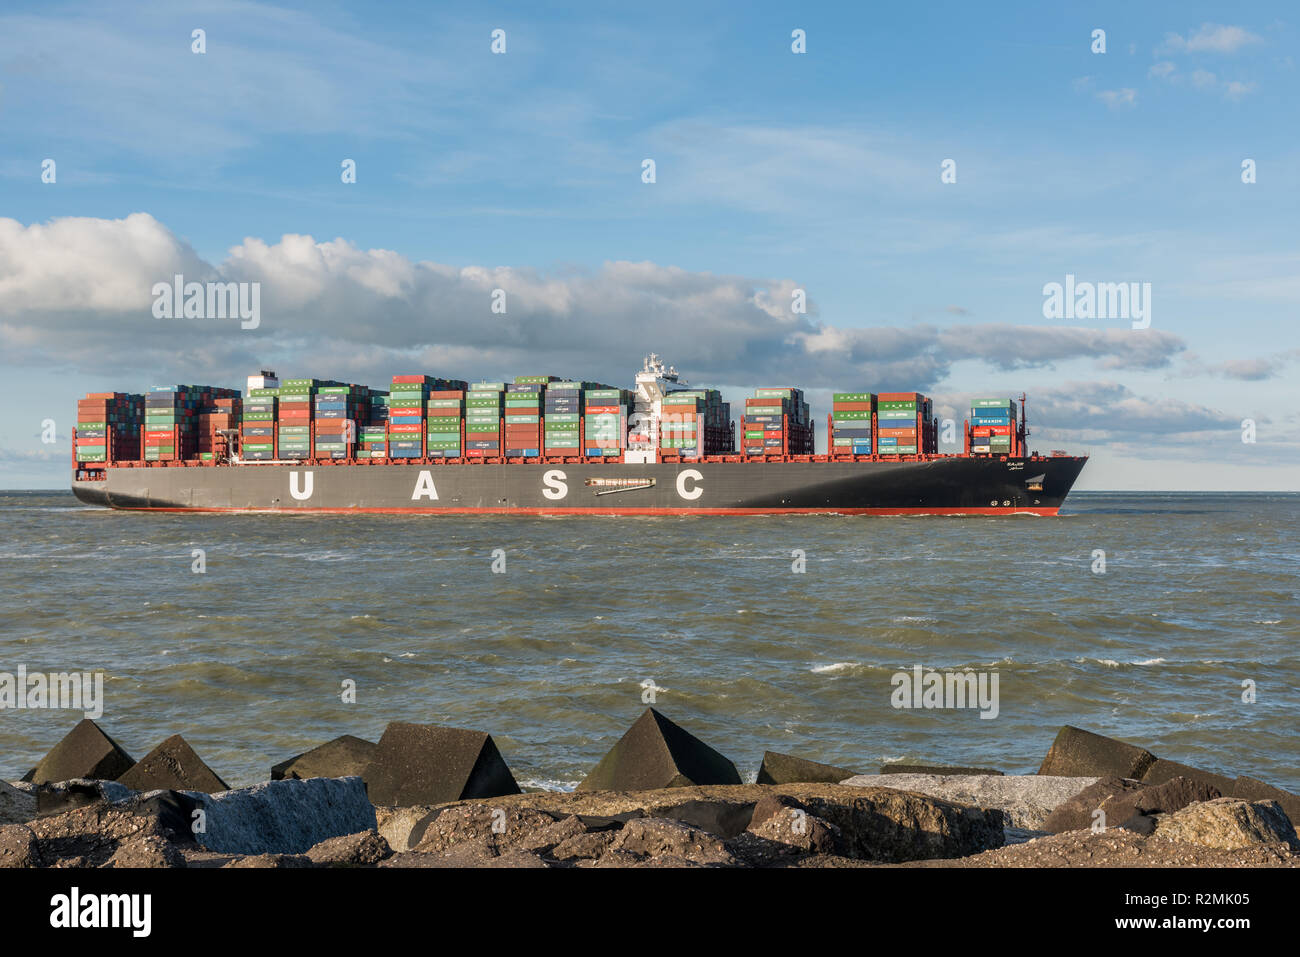 ROTTERDAM, THE NETHERLANDS - FEBRUARY 28, 2016: The ultra large container ship Sajir of UASC arrives at the Maasvlakte, Port of Rotterdam  on February Stock Photo